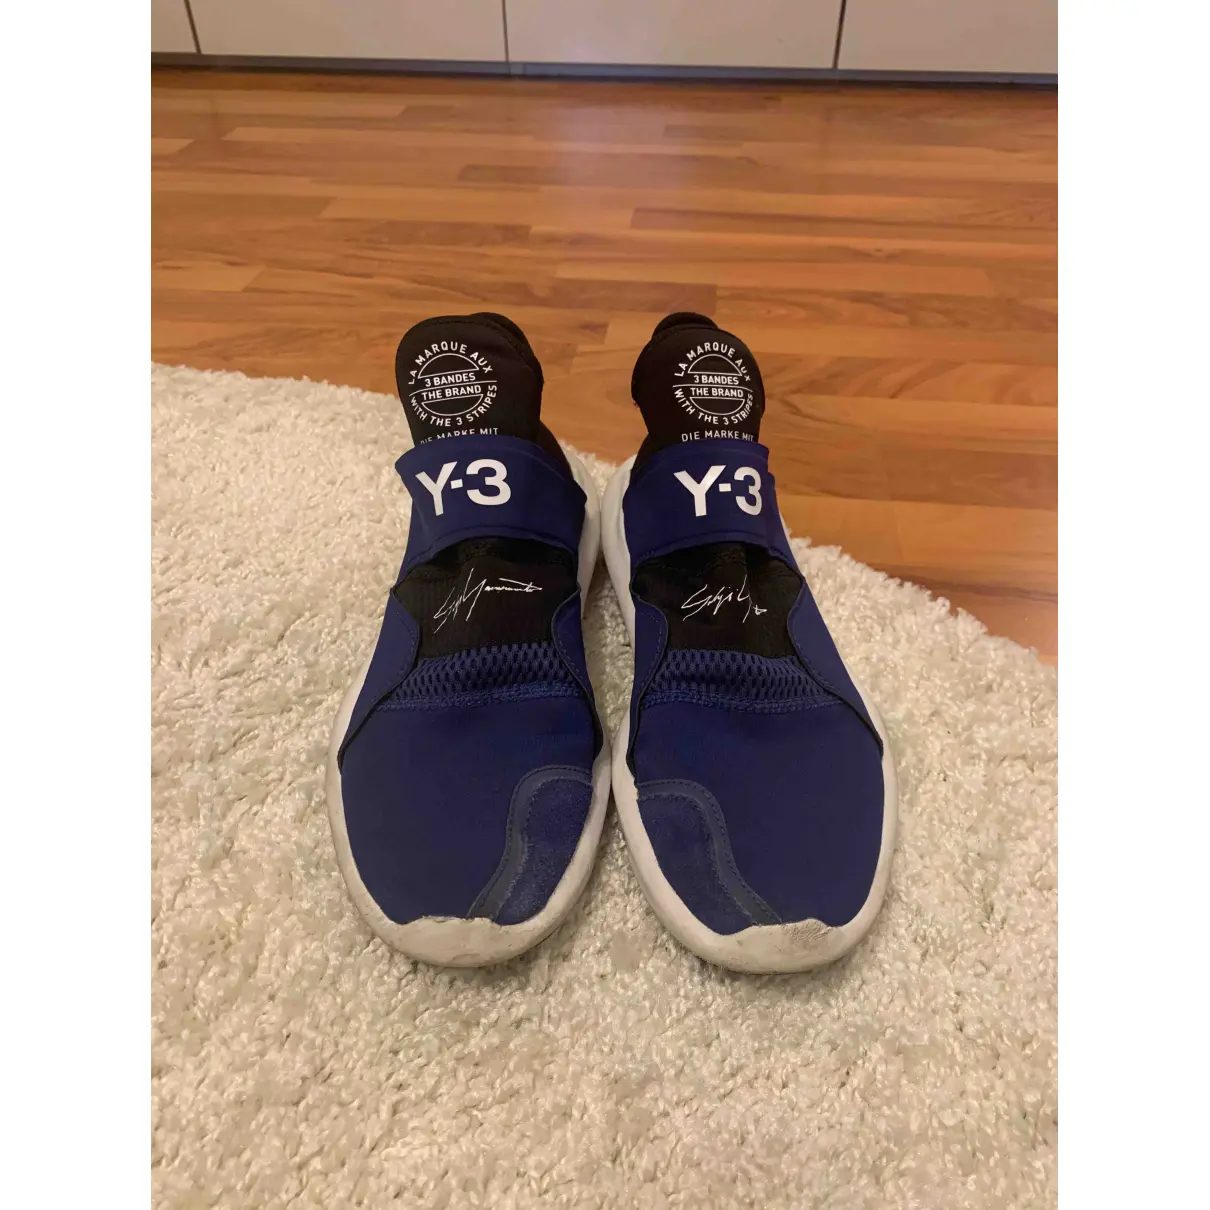 Buy Y-3 High trainers online